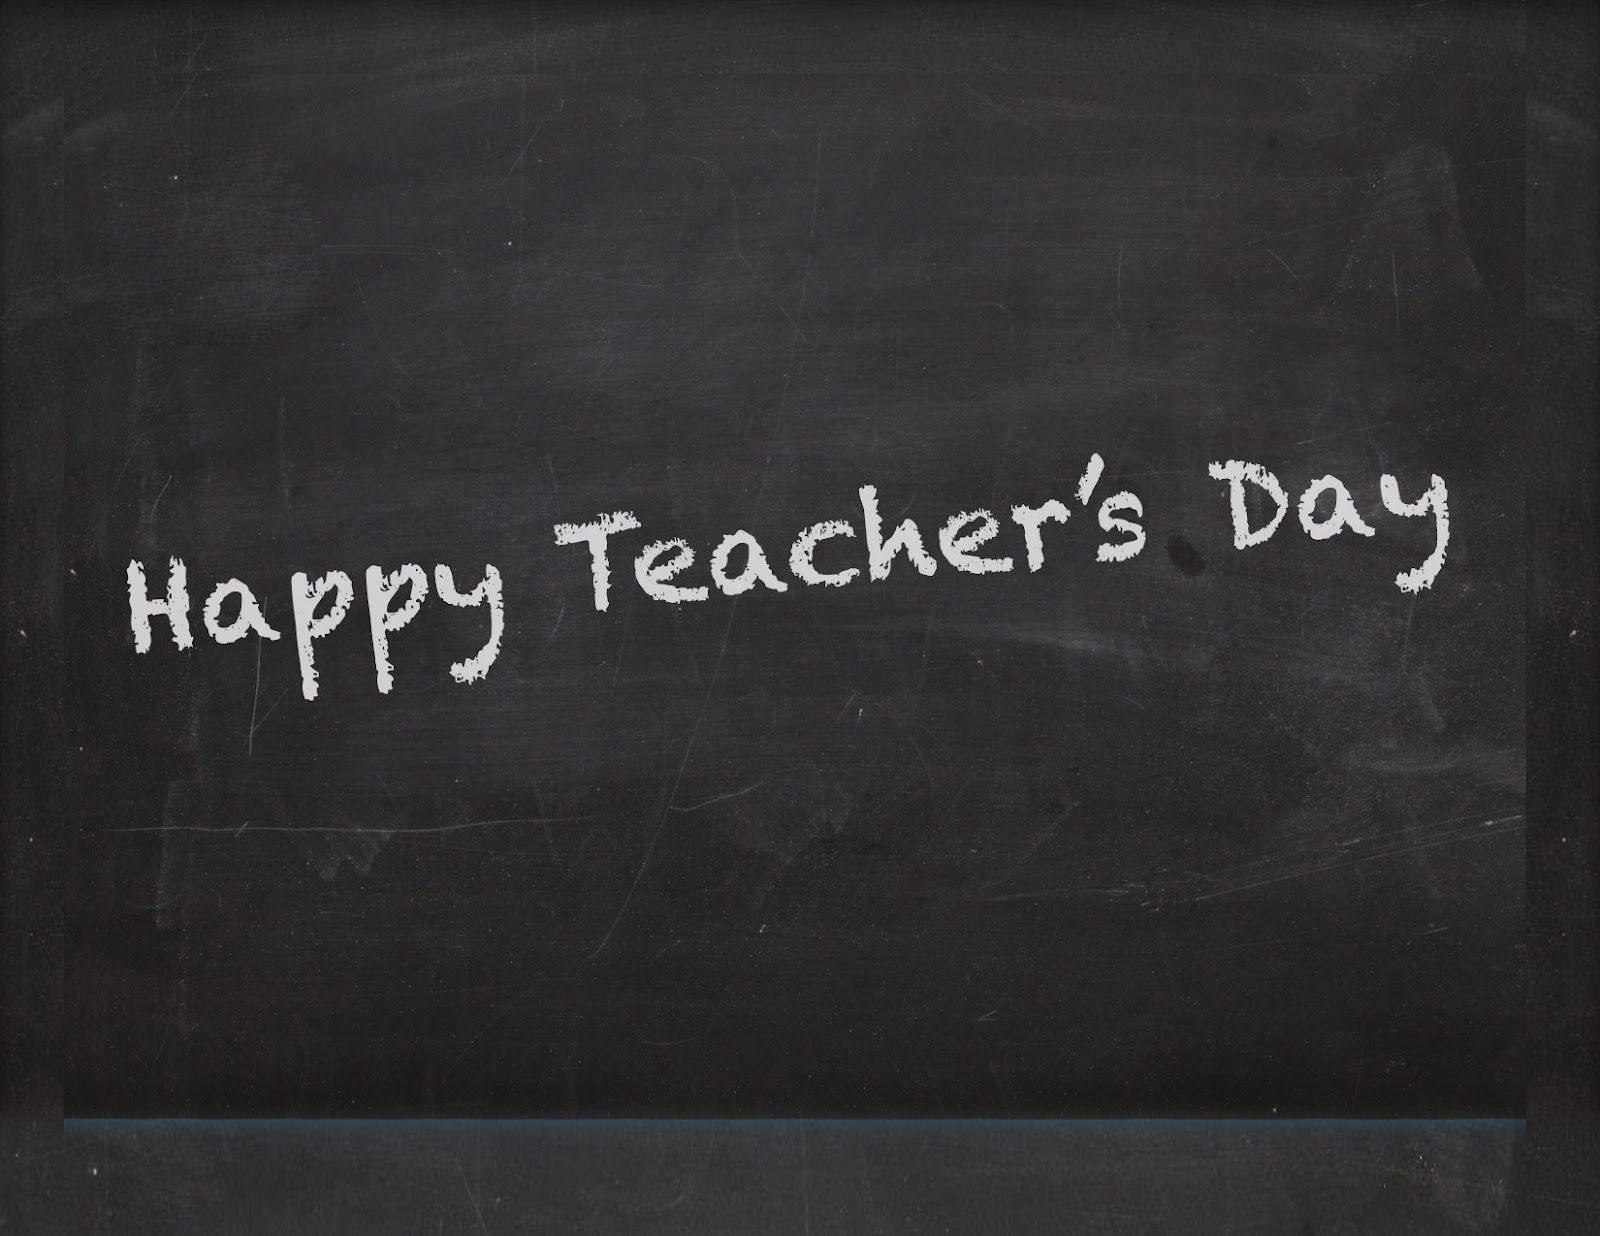 Happy Teachers Day India 2020 Picture, HD Image, Ultra HD Photo, 4K Wallpaper, And High Resolution Photographs For Instagram, WhatsApp, Twitter, Facebook, And Messenger